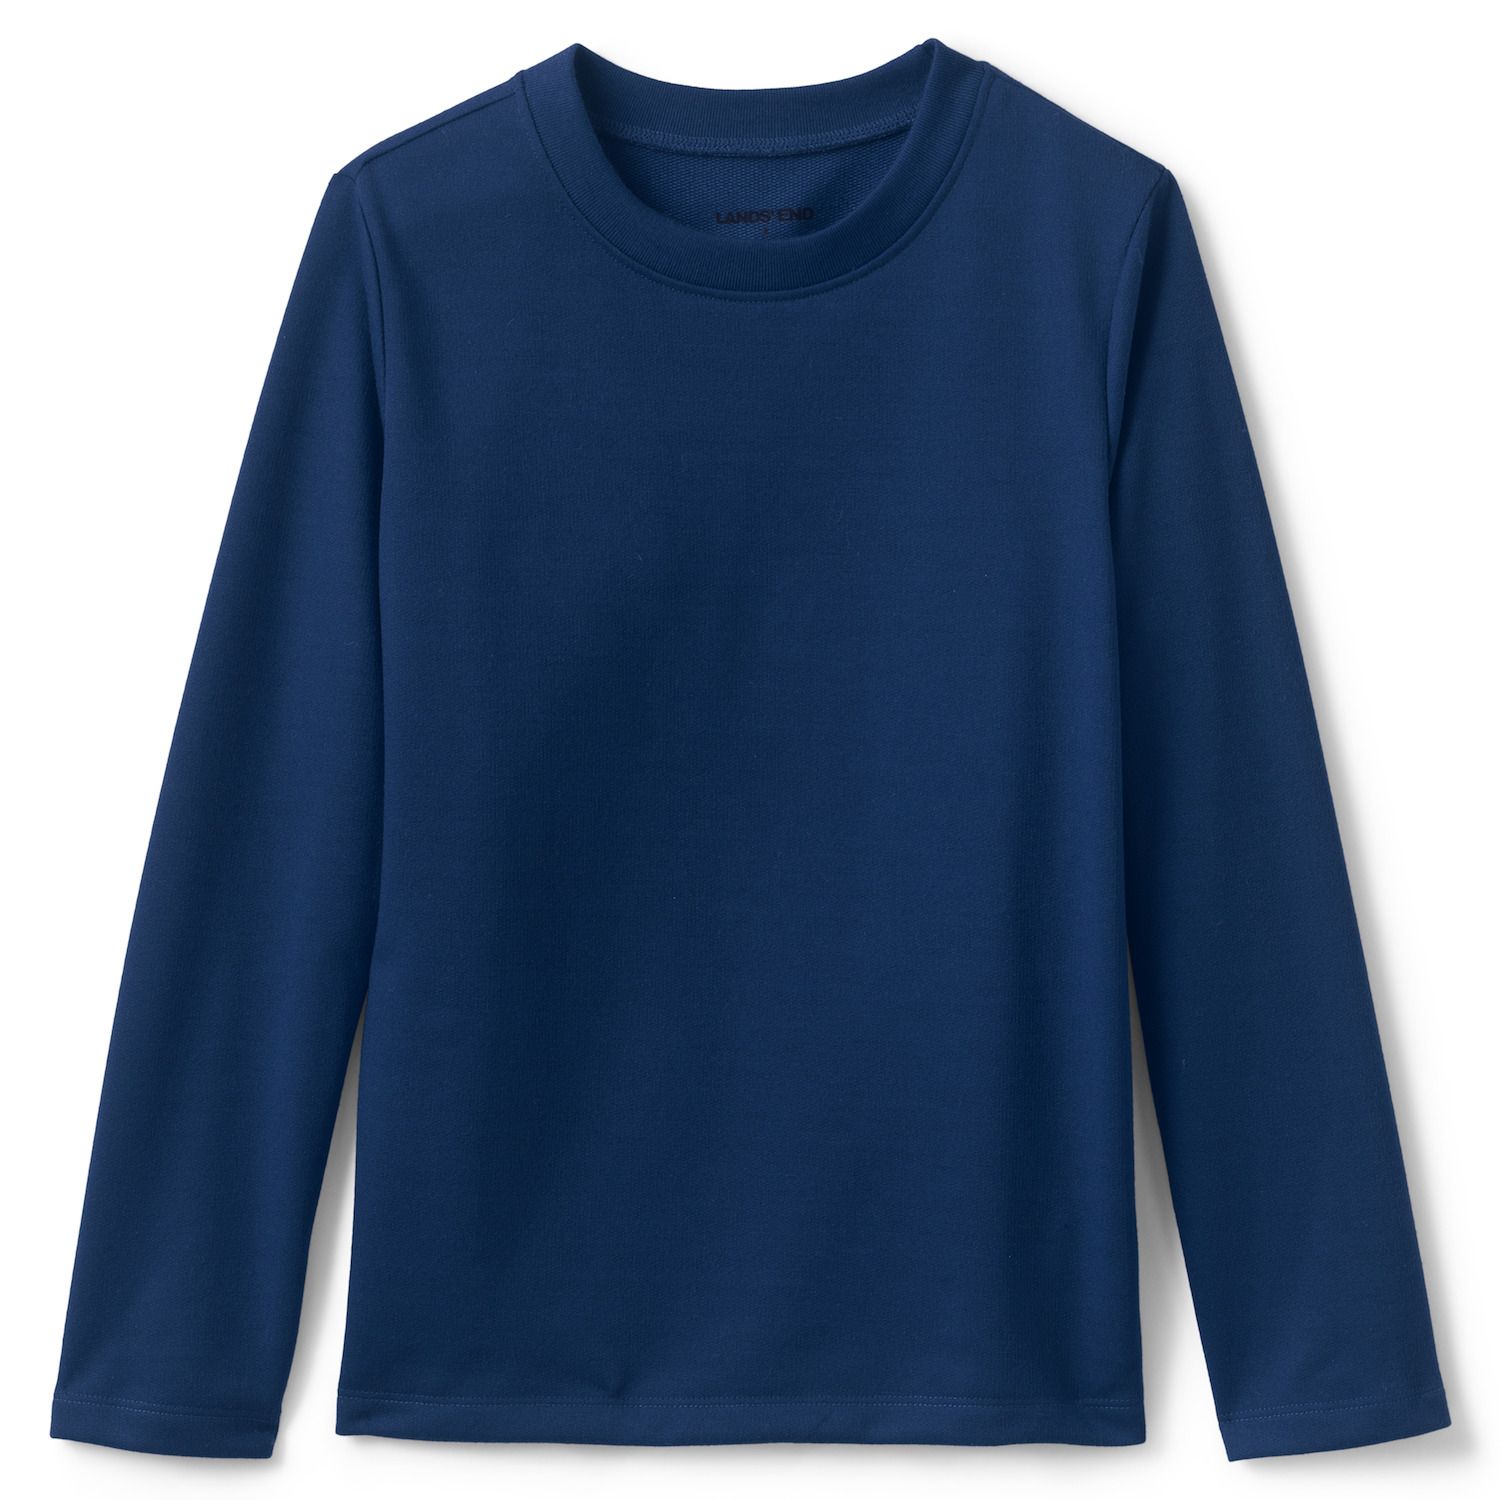 Image for Lands' End Kids 4-20 French Terry Sleep Top at Kohl's.